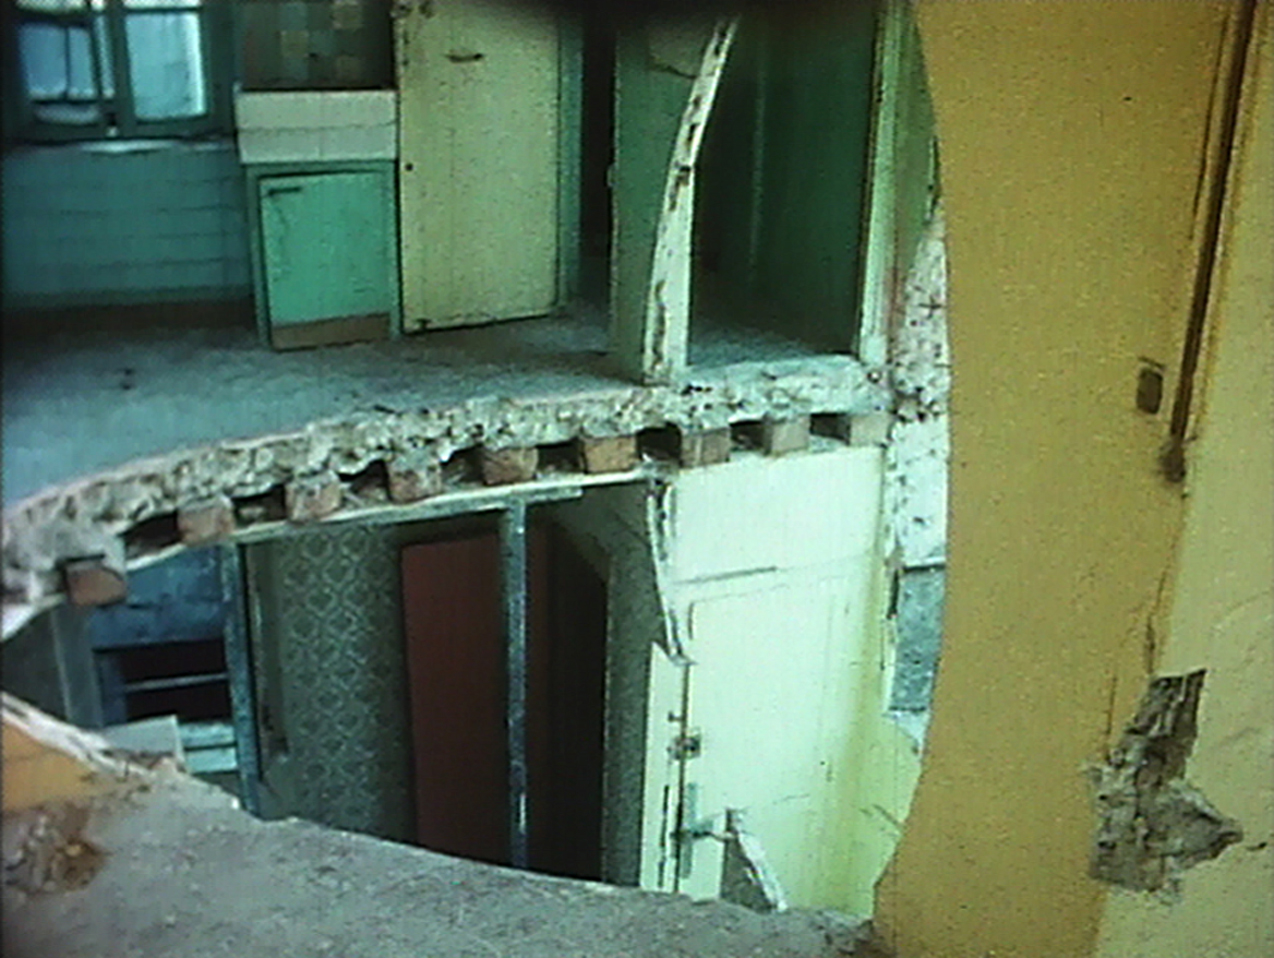  Gordon Matta-Clark,&nbsp; Conical Intersect , 1975, 16 mm film on video, color, without sound, 18:40 minutes. Courtesy of Electronic Arts Intermix (EAI), New York. 